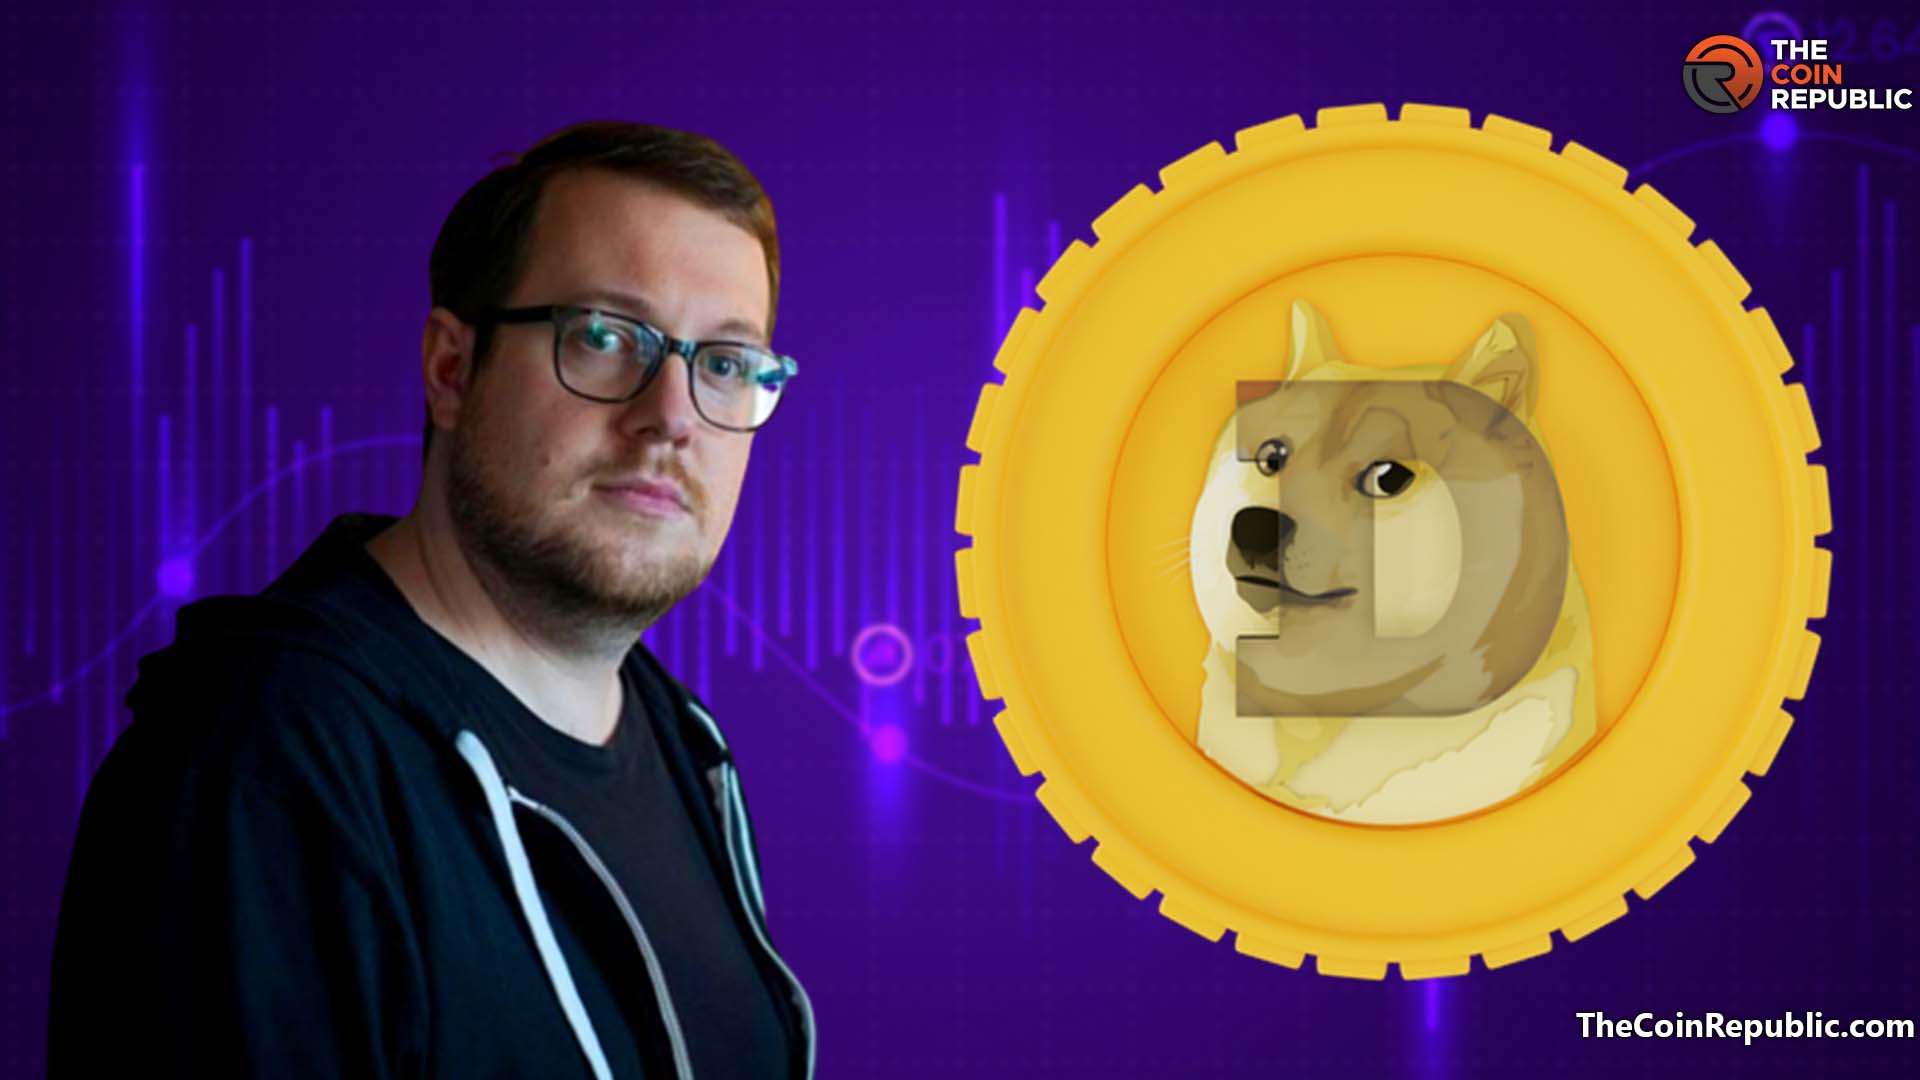 Dogecoin (DOGE): A Fun and Friendly Cryptocurrency | Gemini